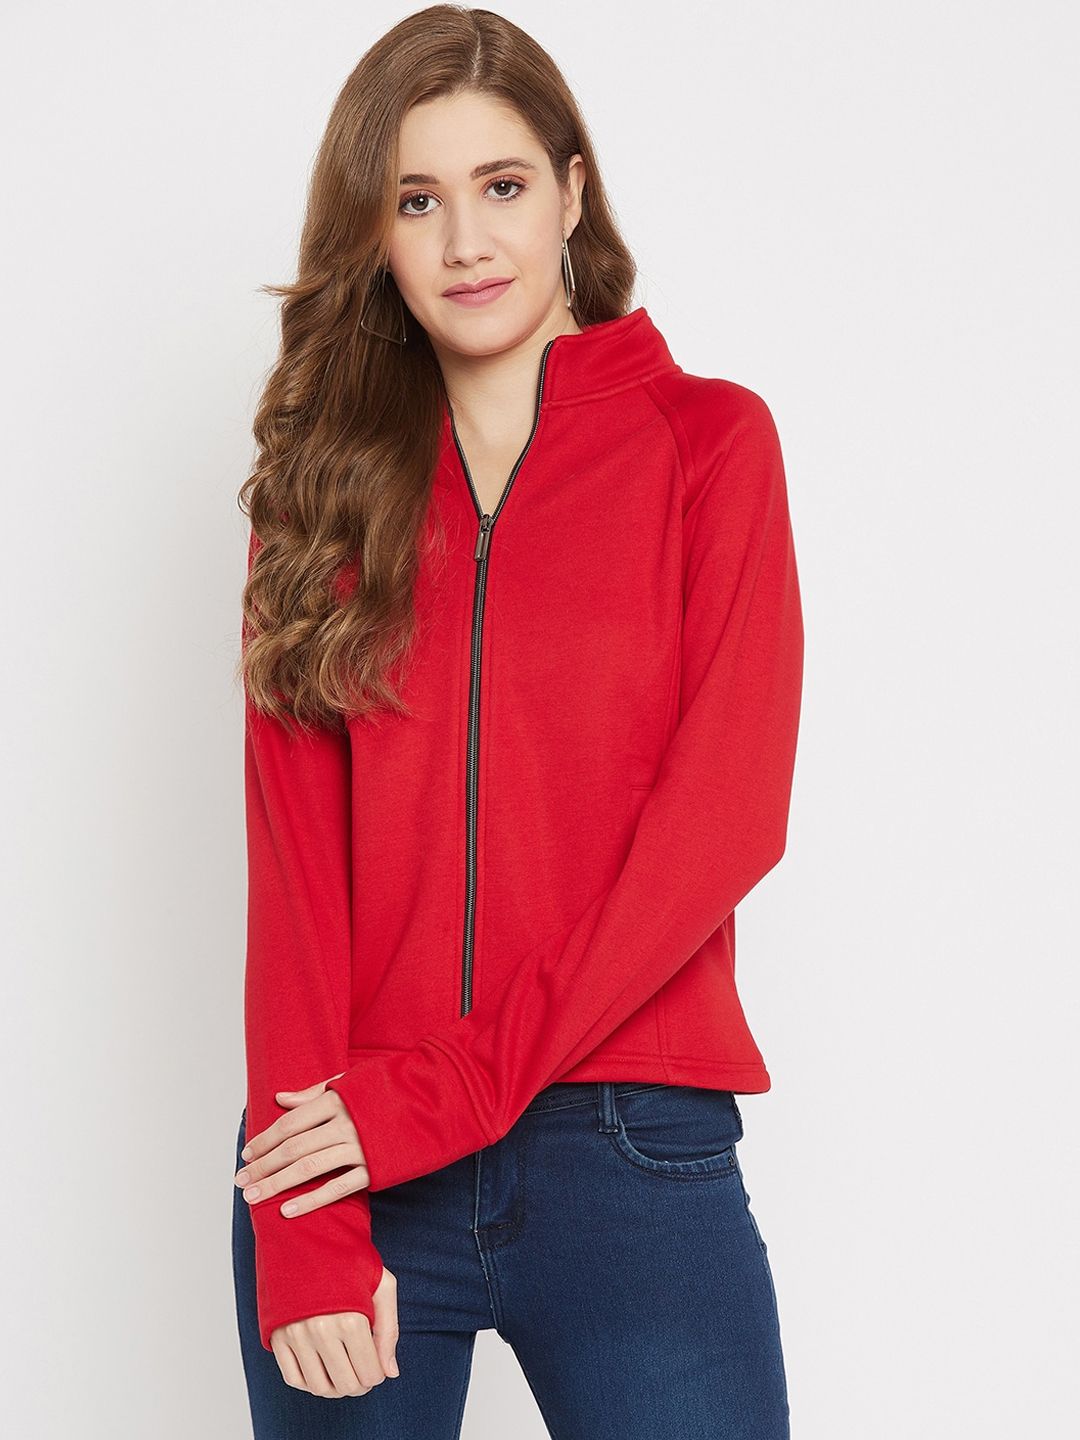 AGIL ATHLETICA Women Red Geometric Lightweight Tailored Jacket Price in India